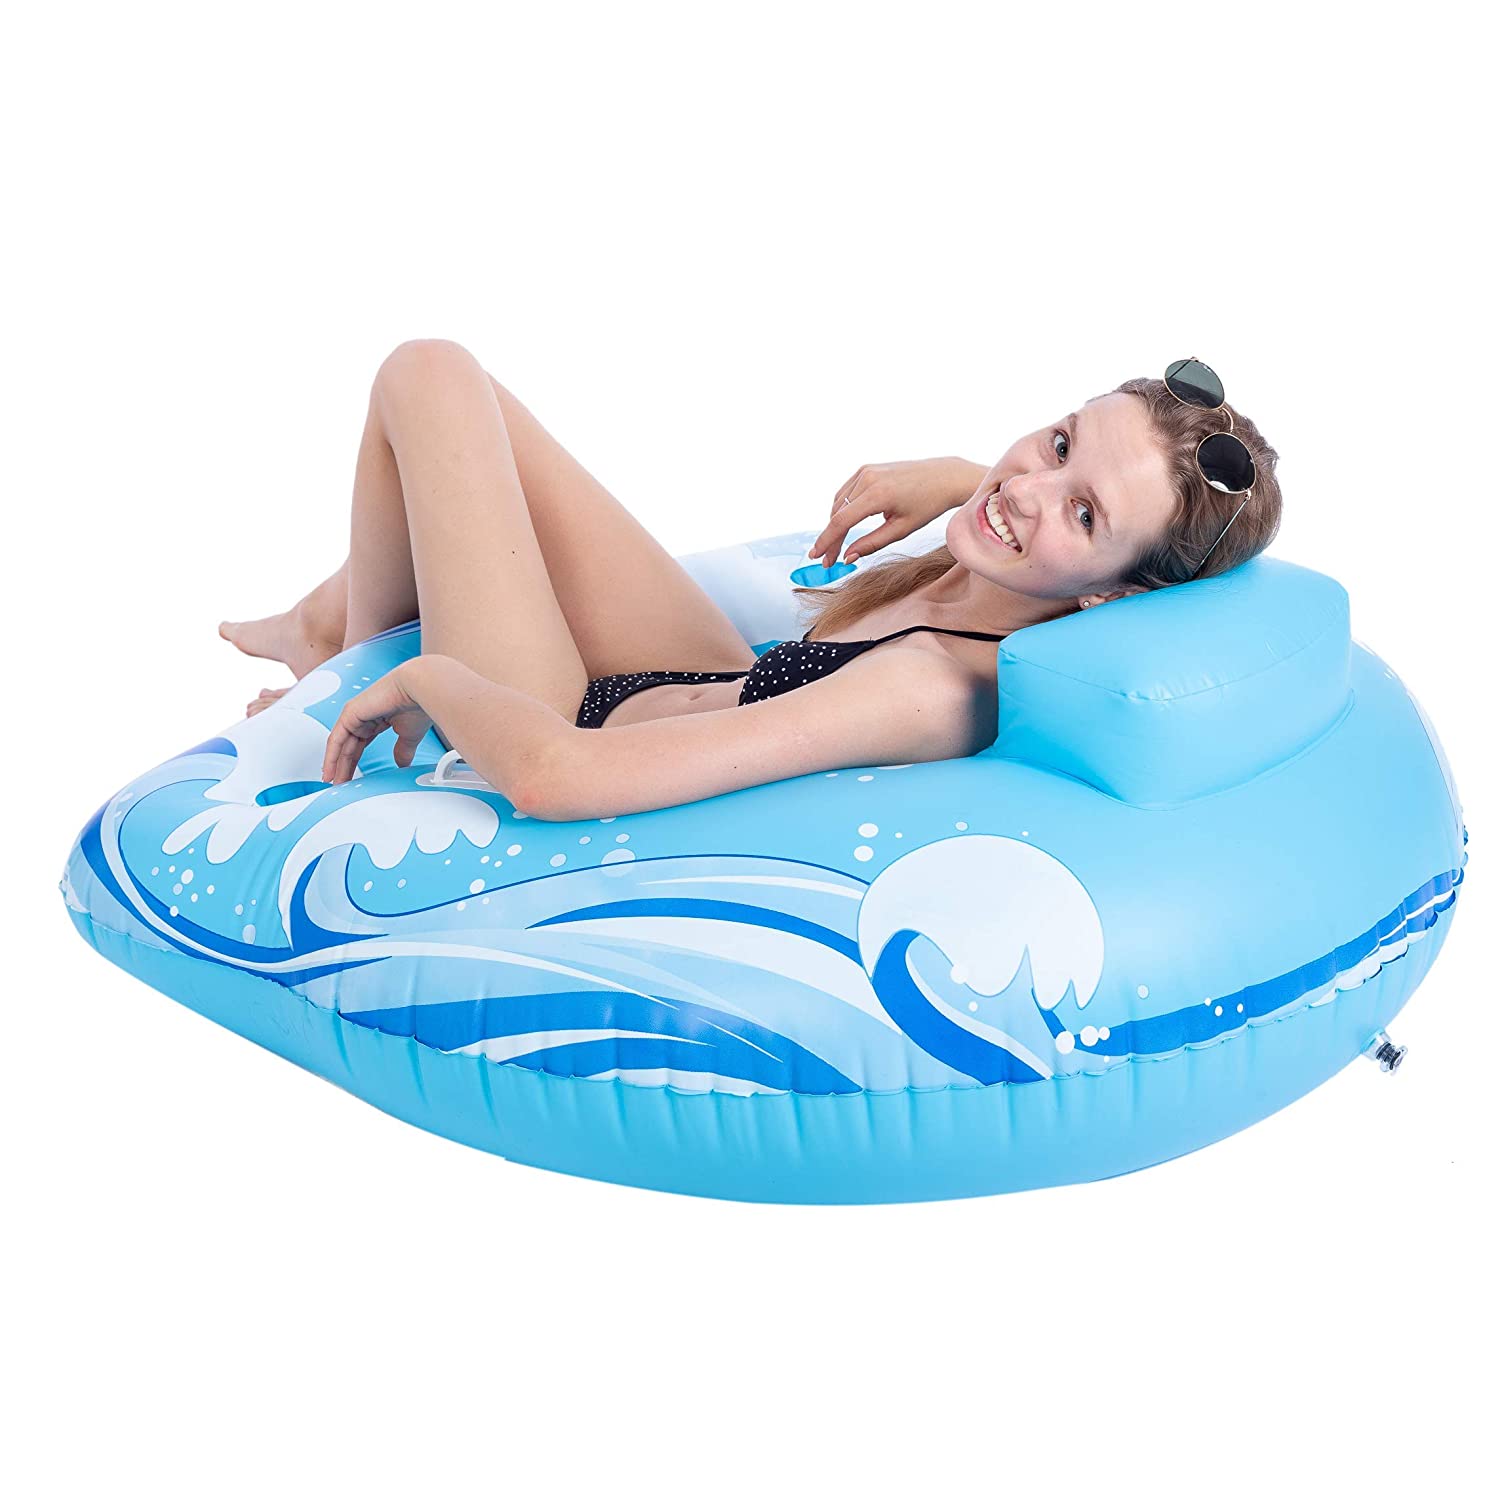 JOYIN Inflatable Pool Lounger, Pool Float for Swimming Pool Party Decorations, Inflated Size 44 x 42